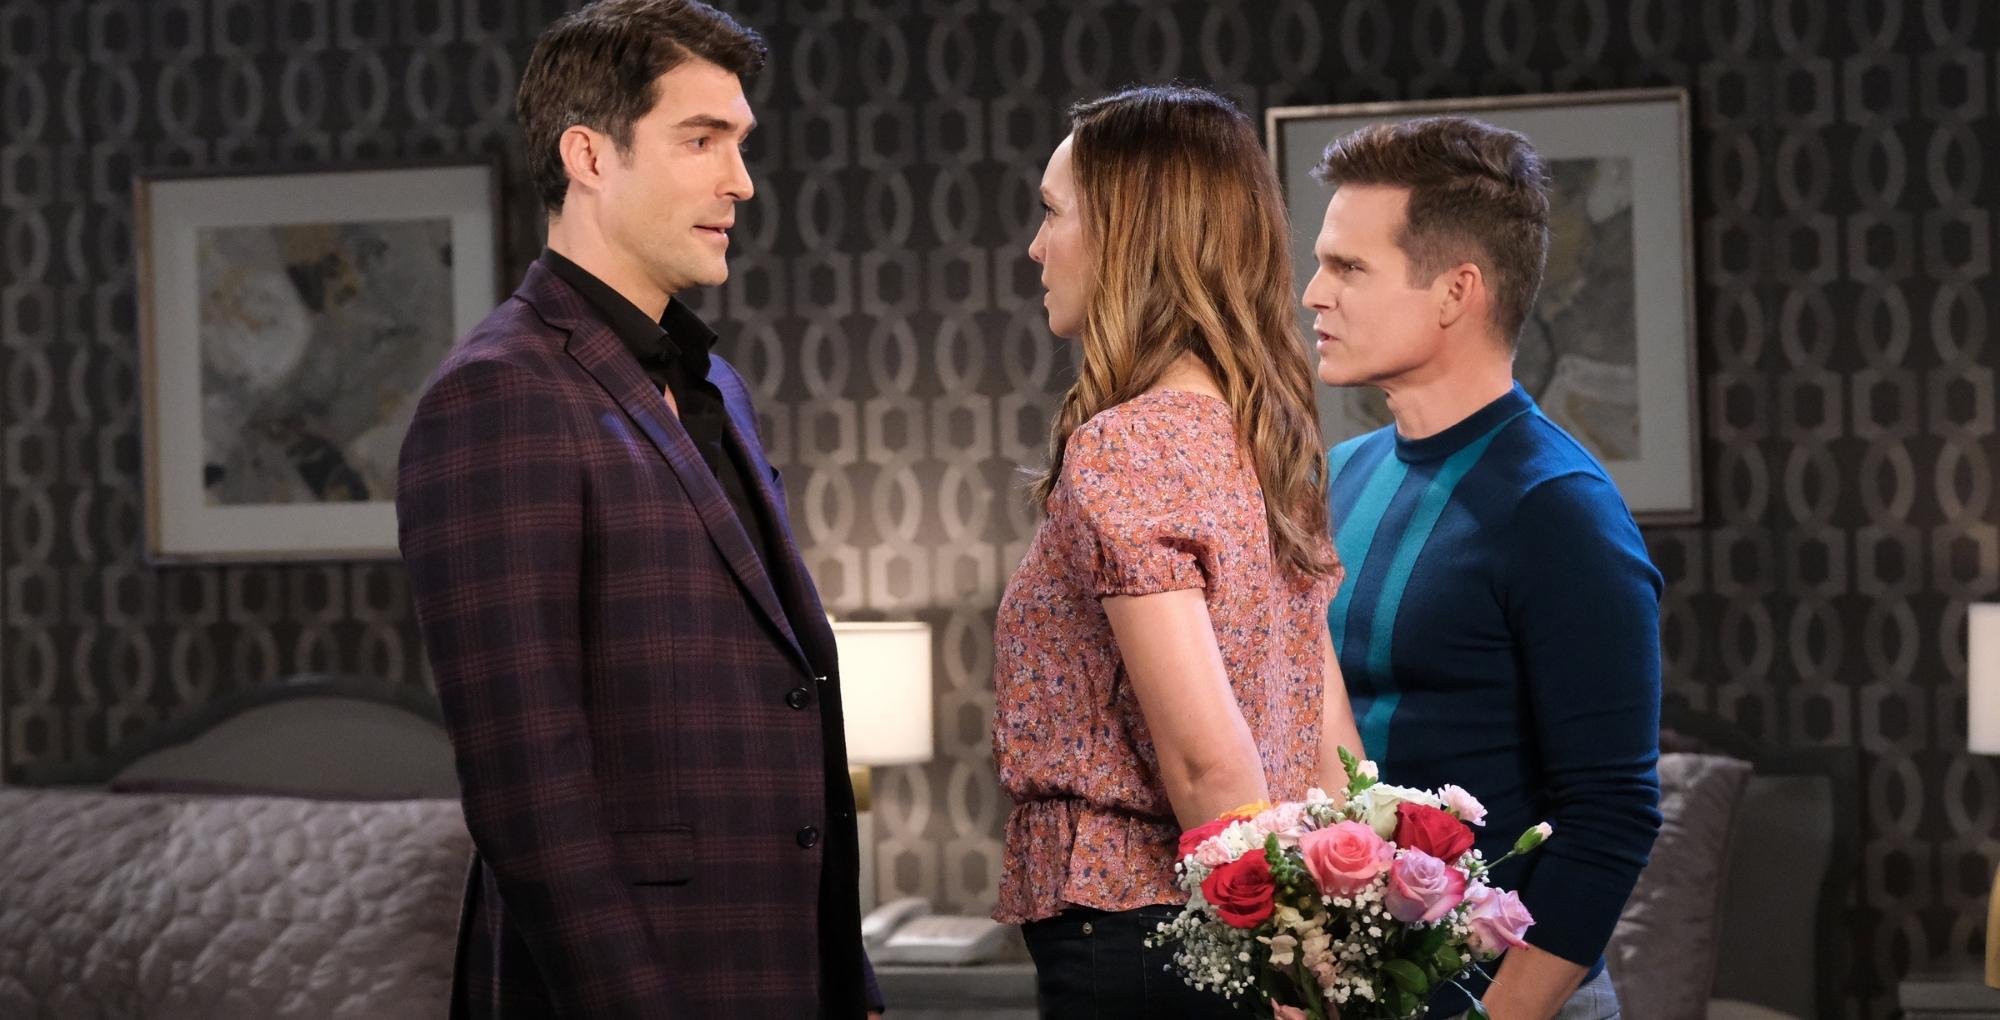 days of our lives spoilers for june 29, 2023, have dimitri, gwen, and leo in the hotel room.